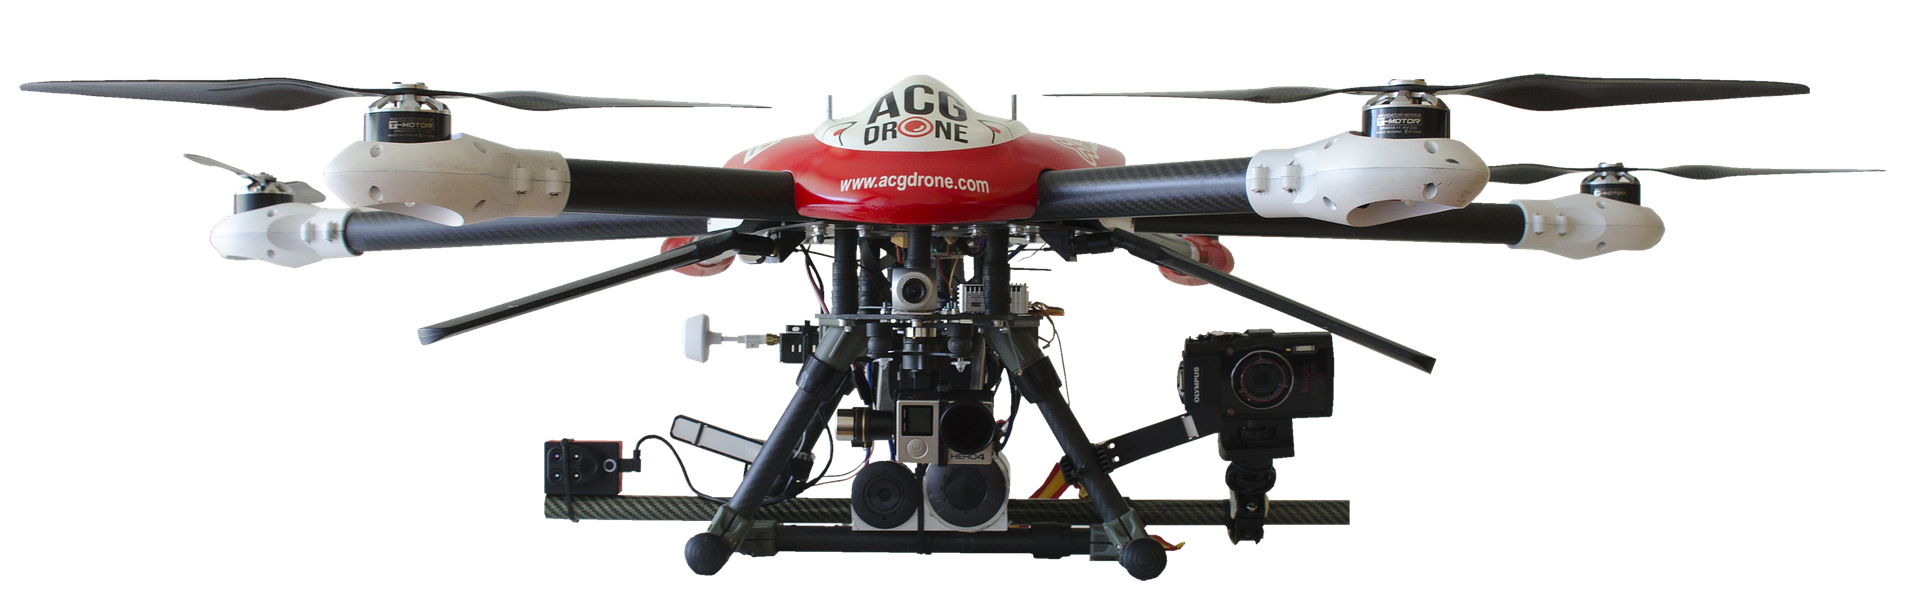 A Red Drone With Black Wheels